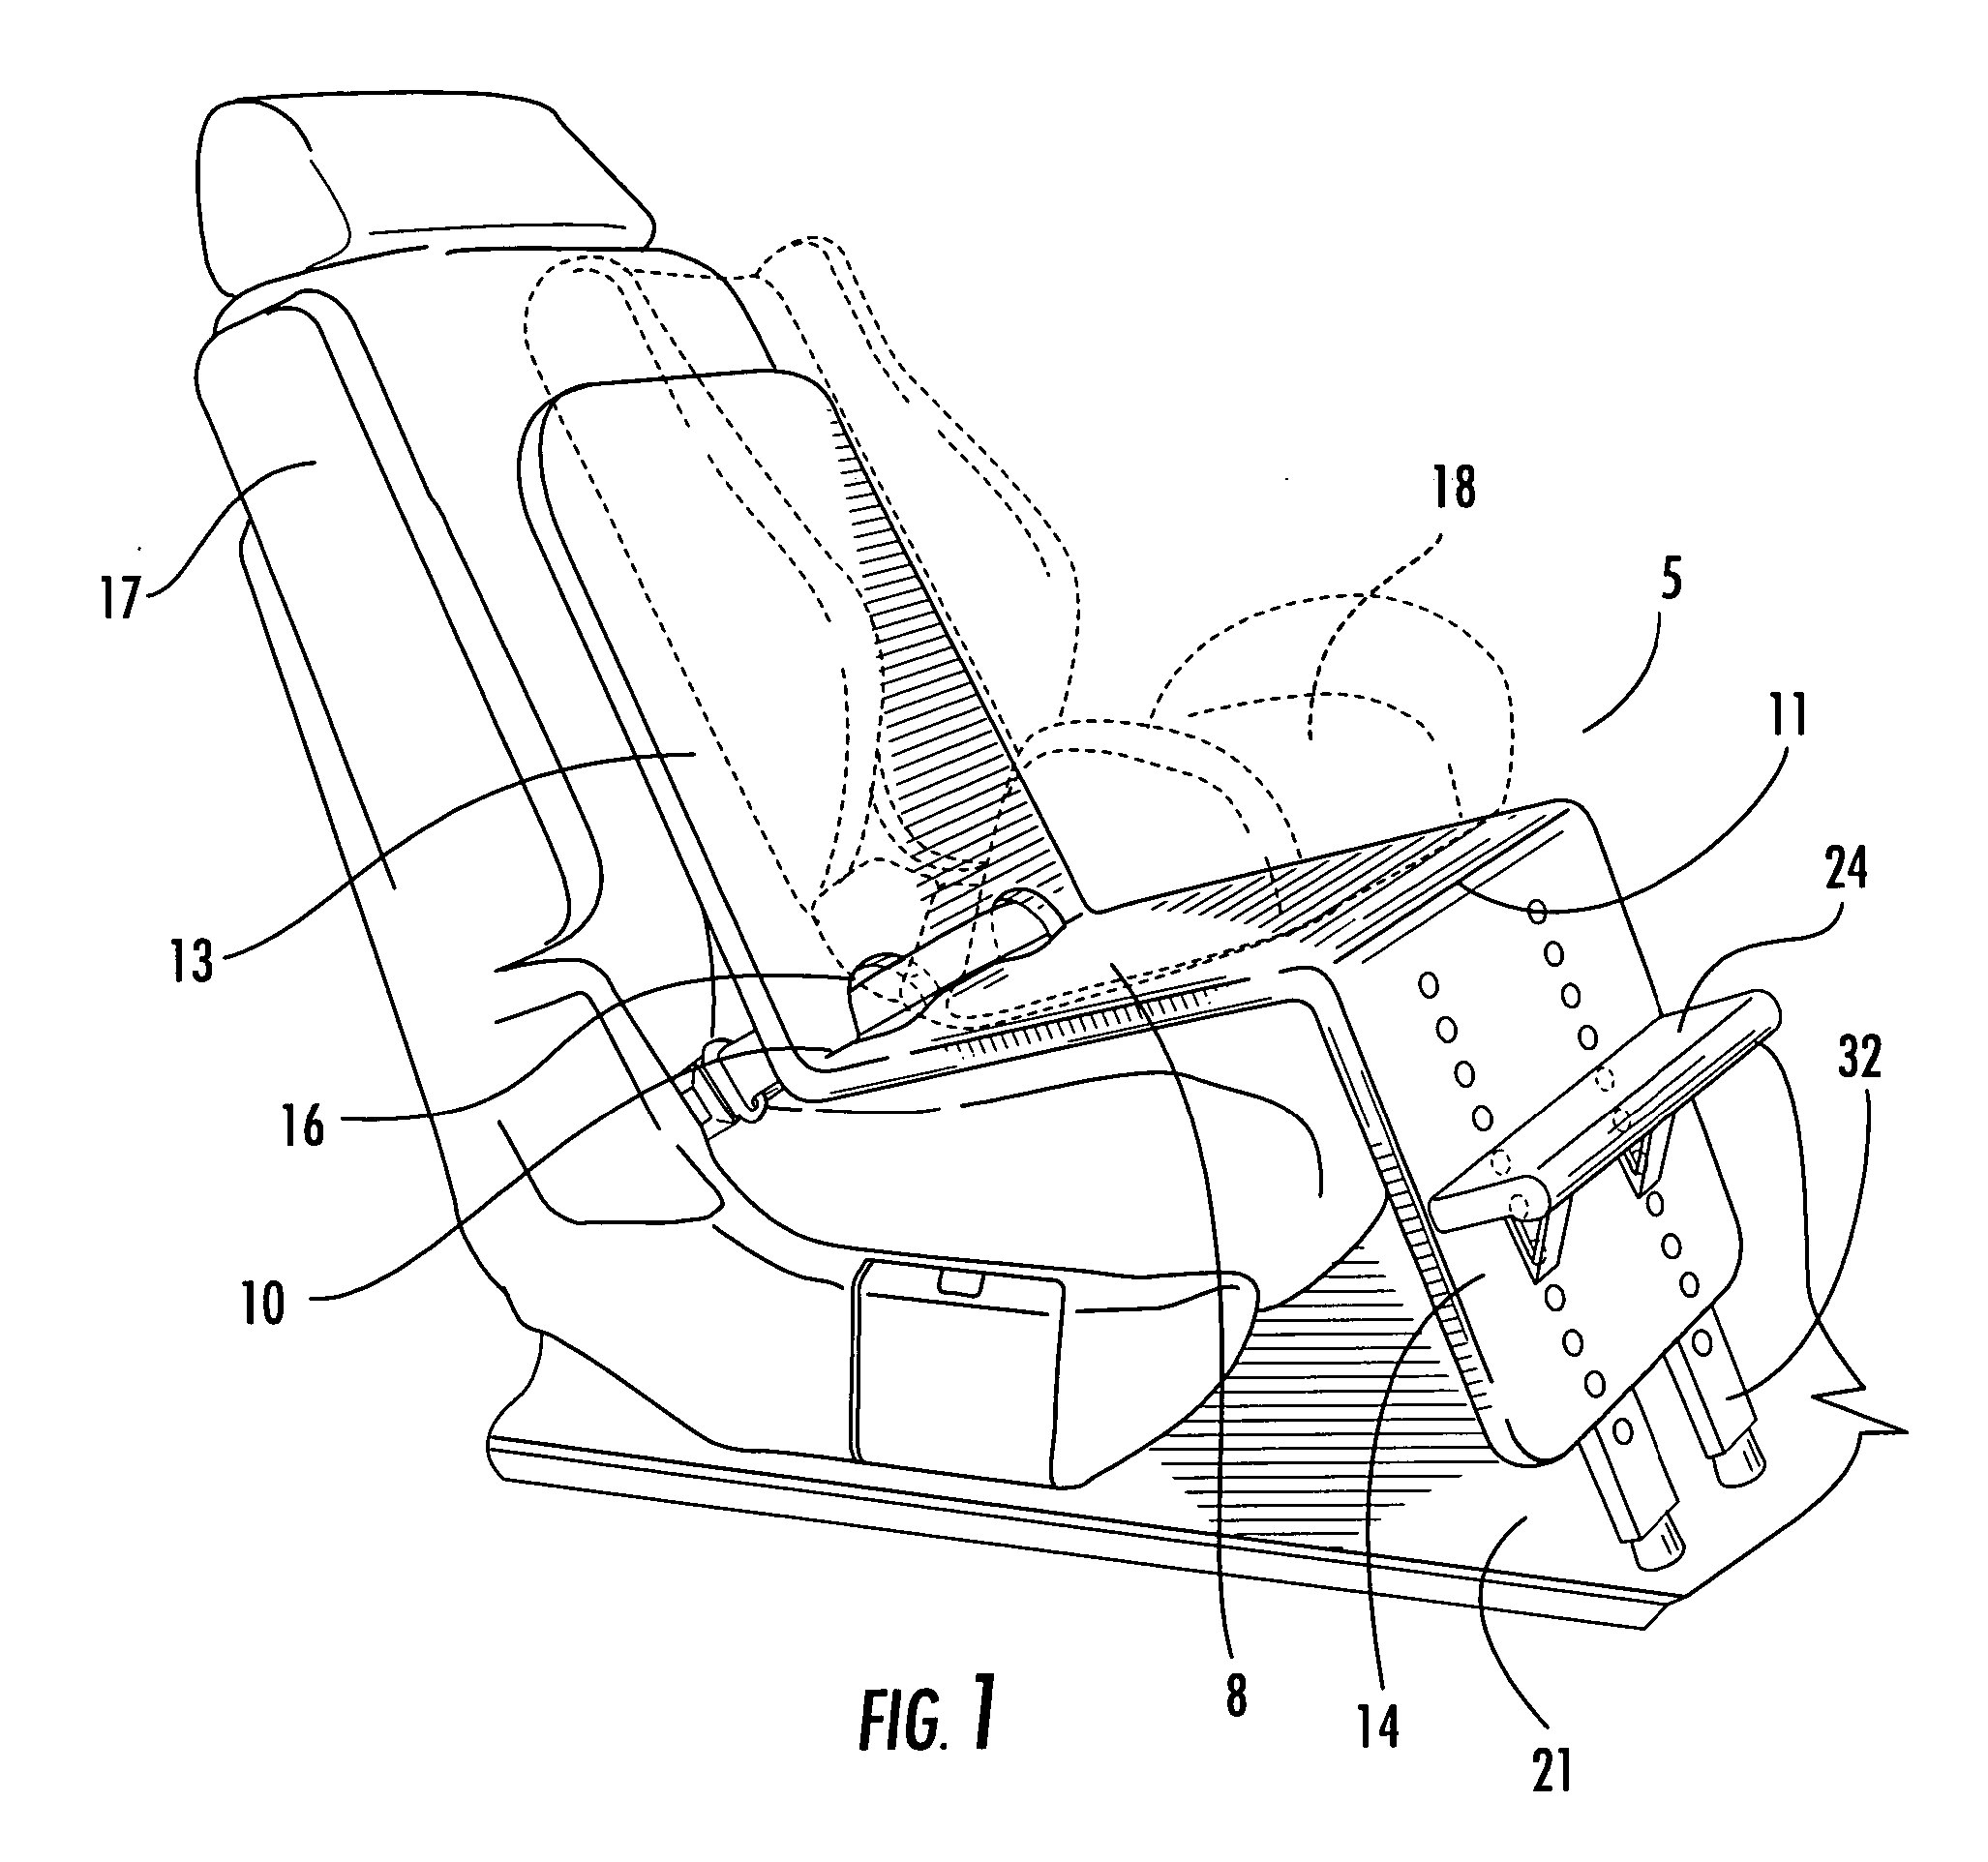 Child safety seat support apparatus